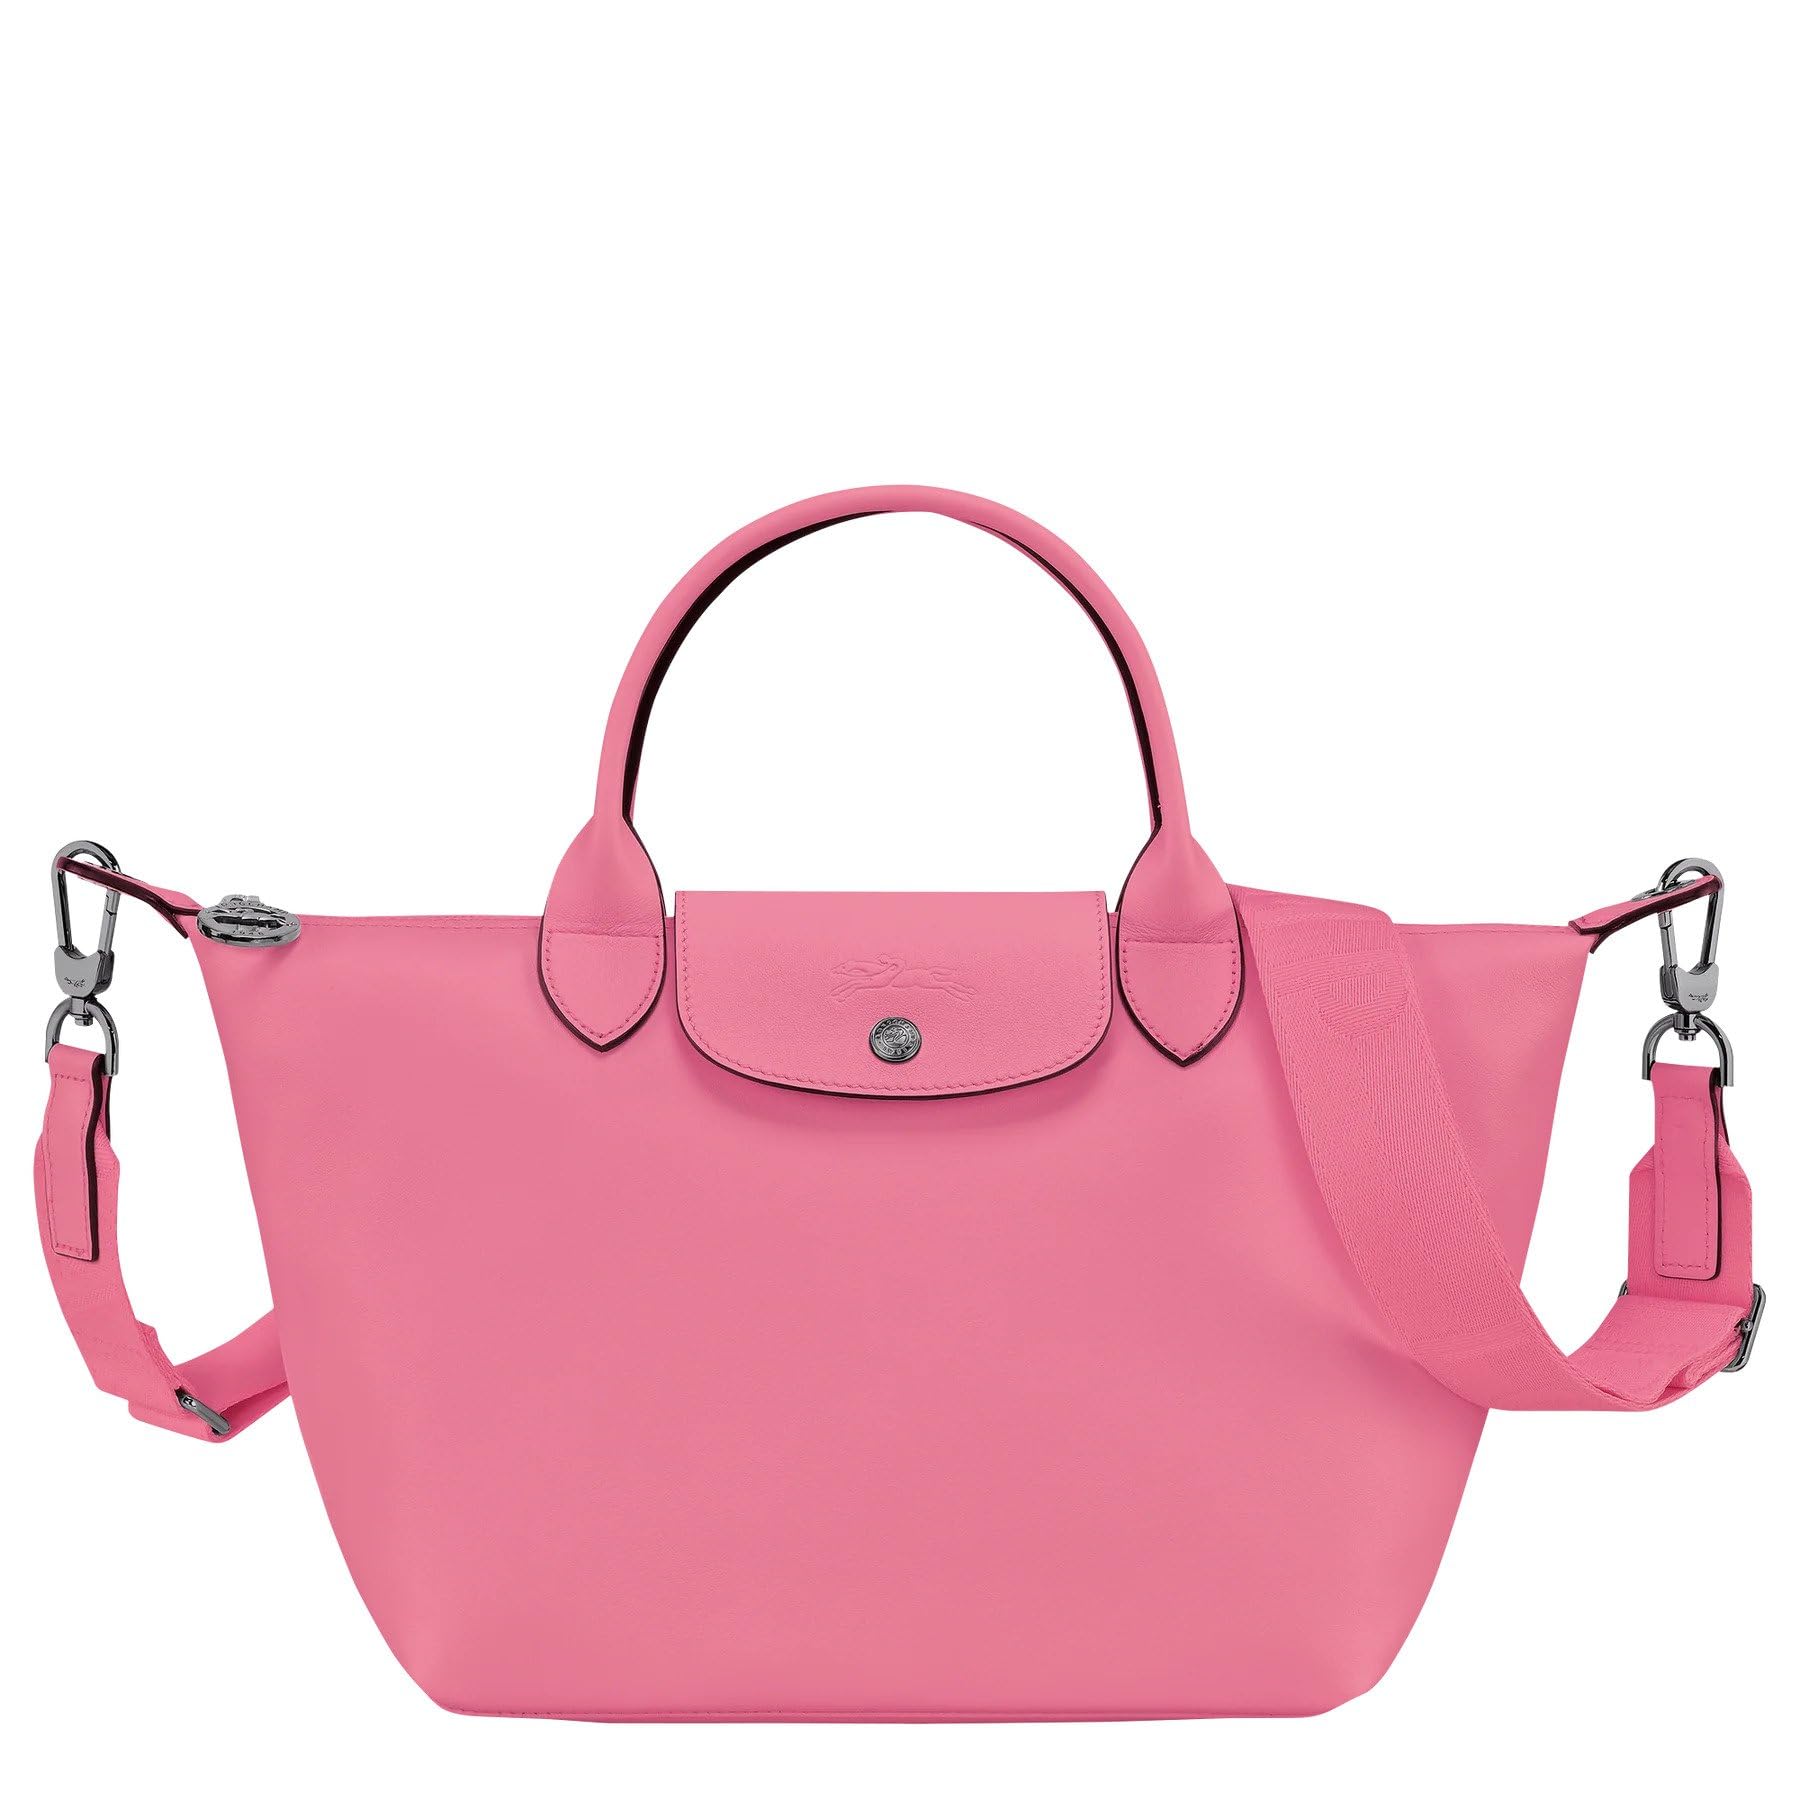 Longchamp 'Small Cuir Leather Top Handle Tote Shoulder Bag, Pink